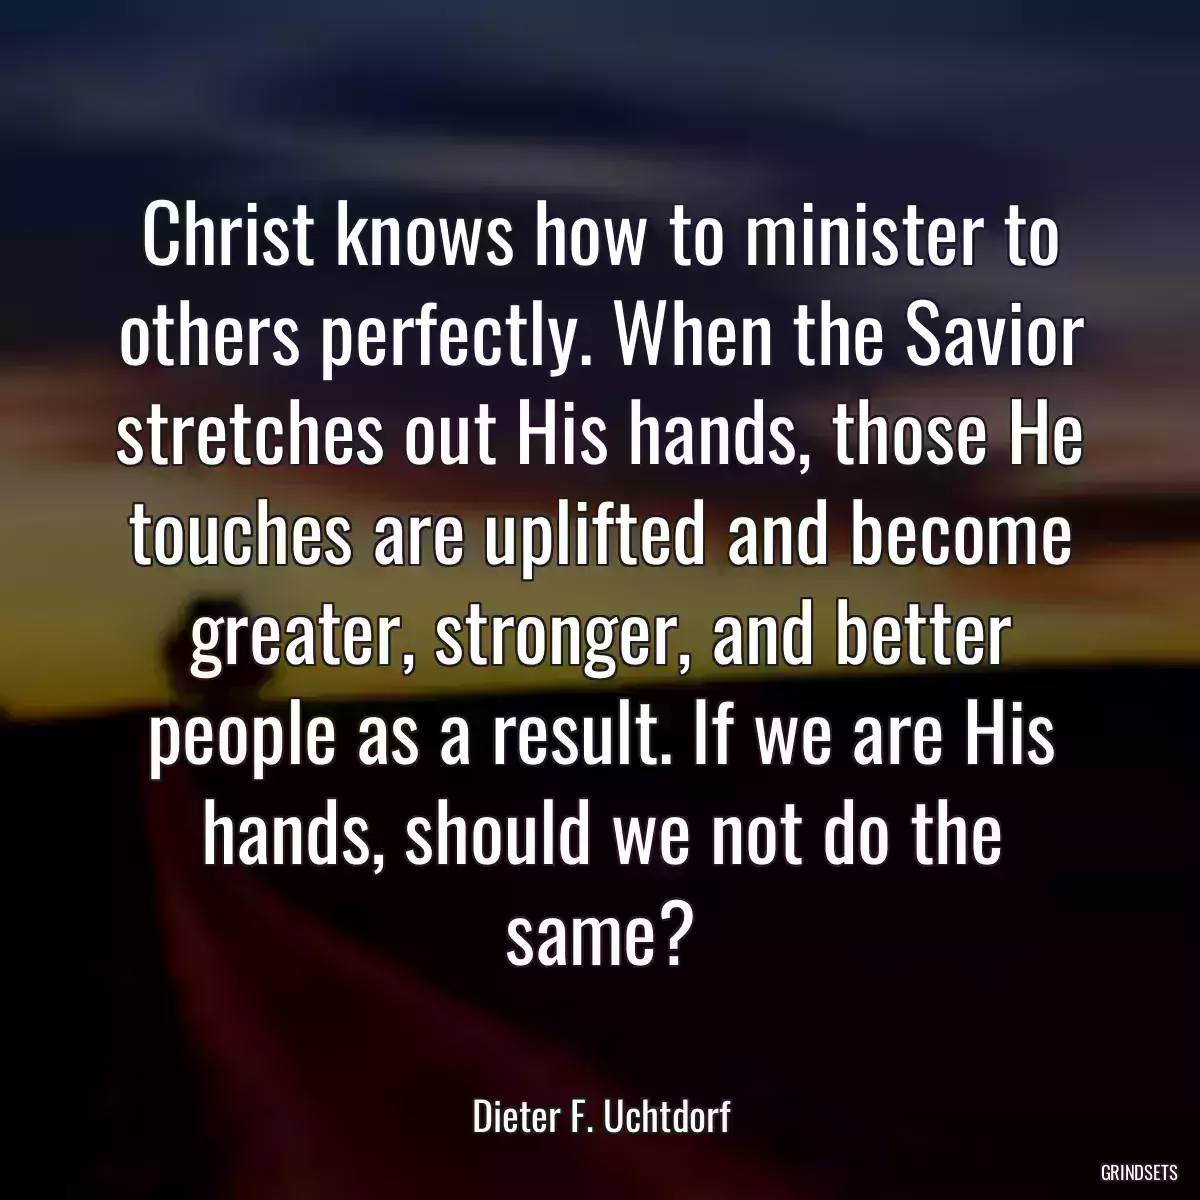 Christ knows how to minister to others perfectly. When the Savior stretches out His hands, those He touches are uplifted and become greater, stronger, and better people as a result. If we are His hands, should we not do the same?